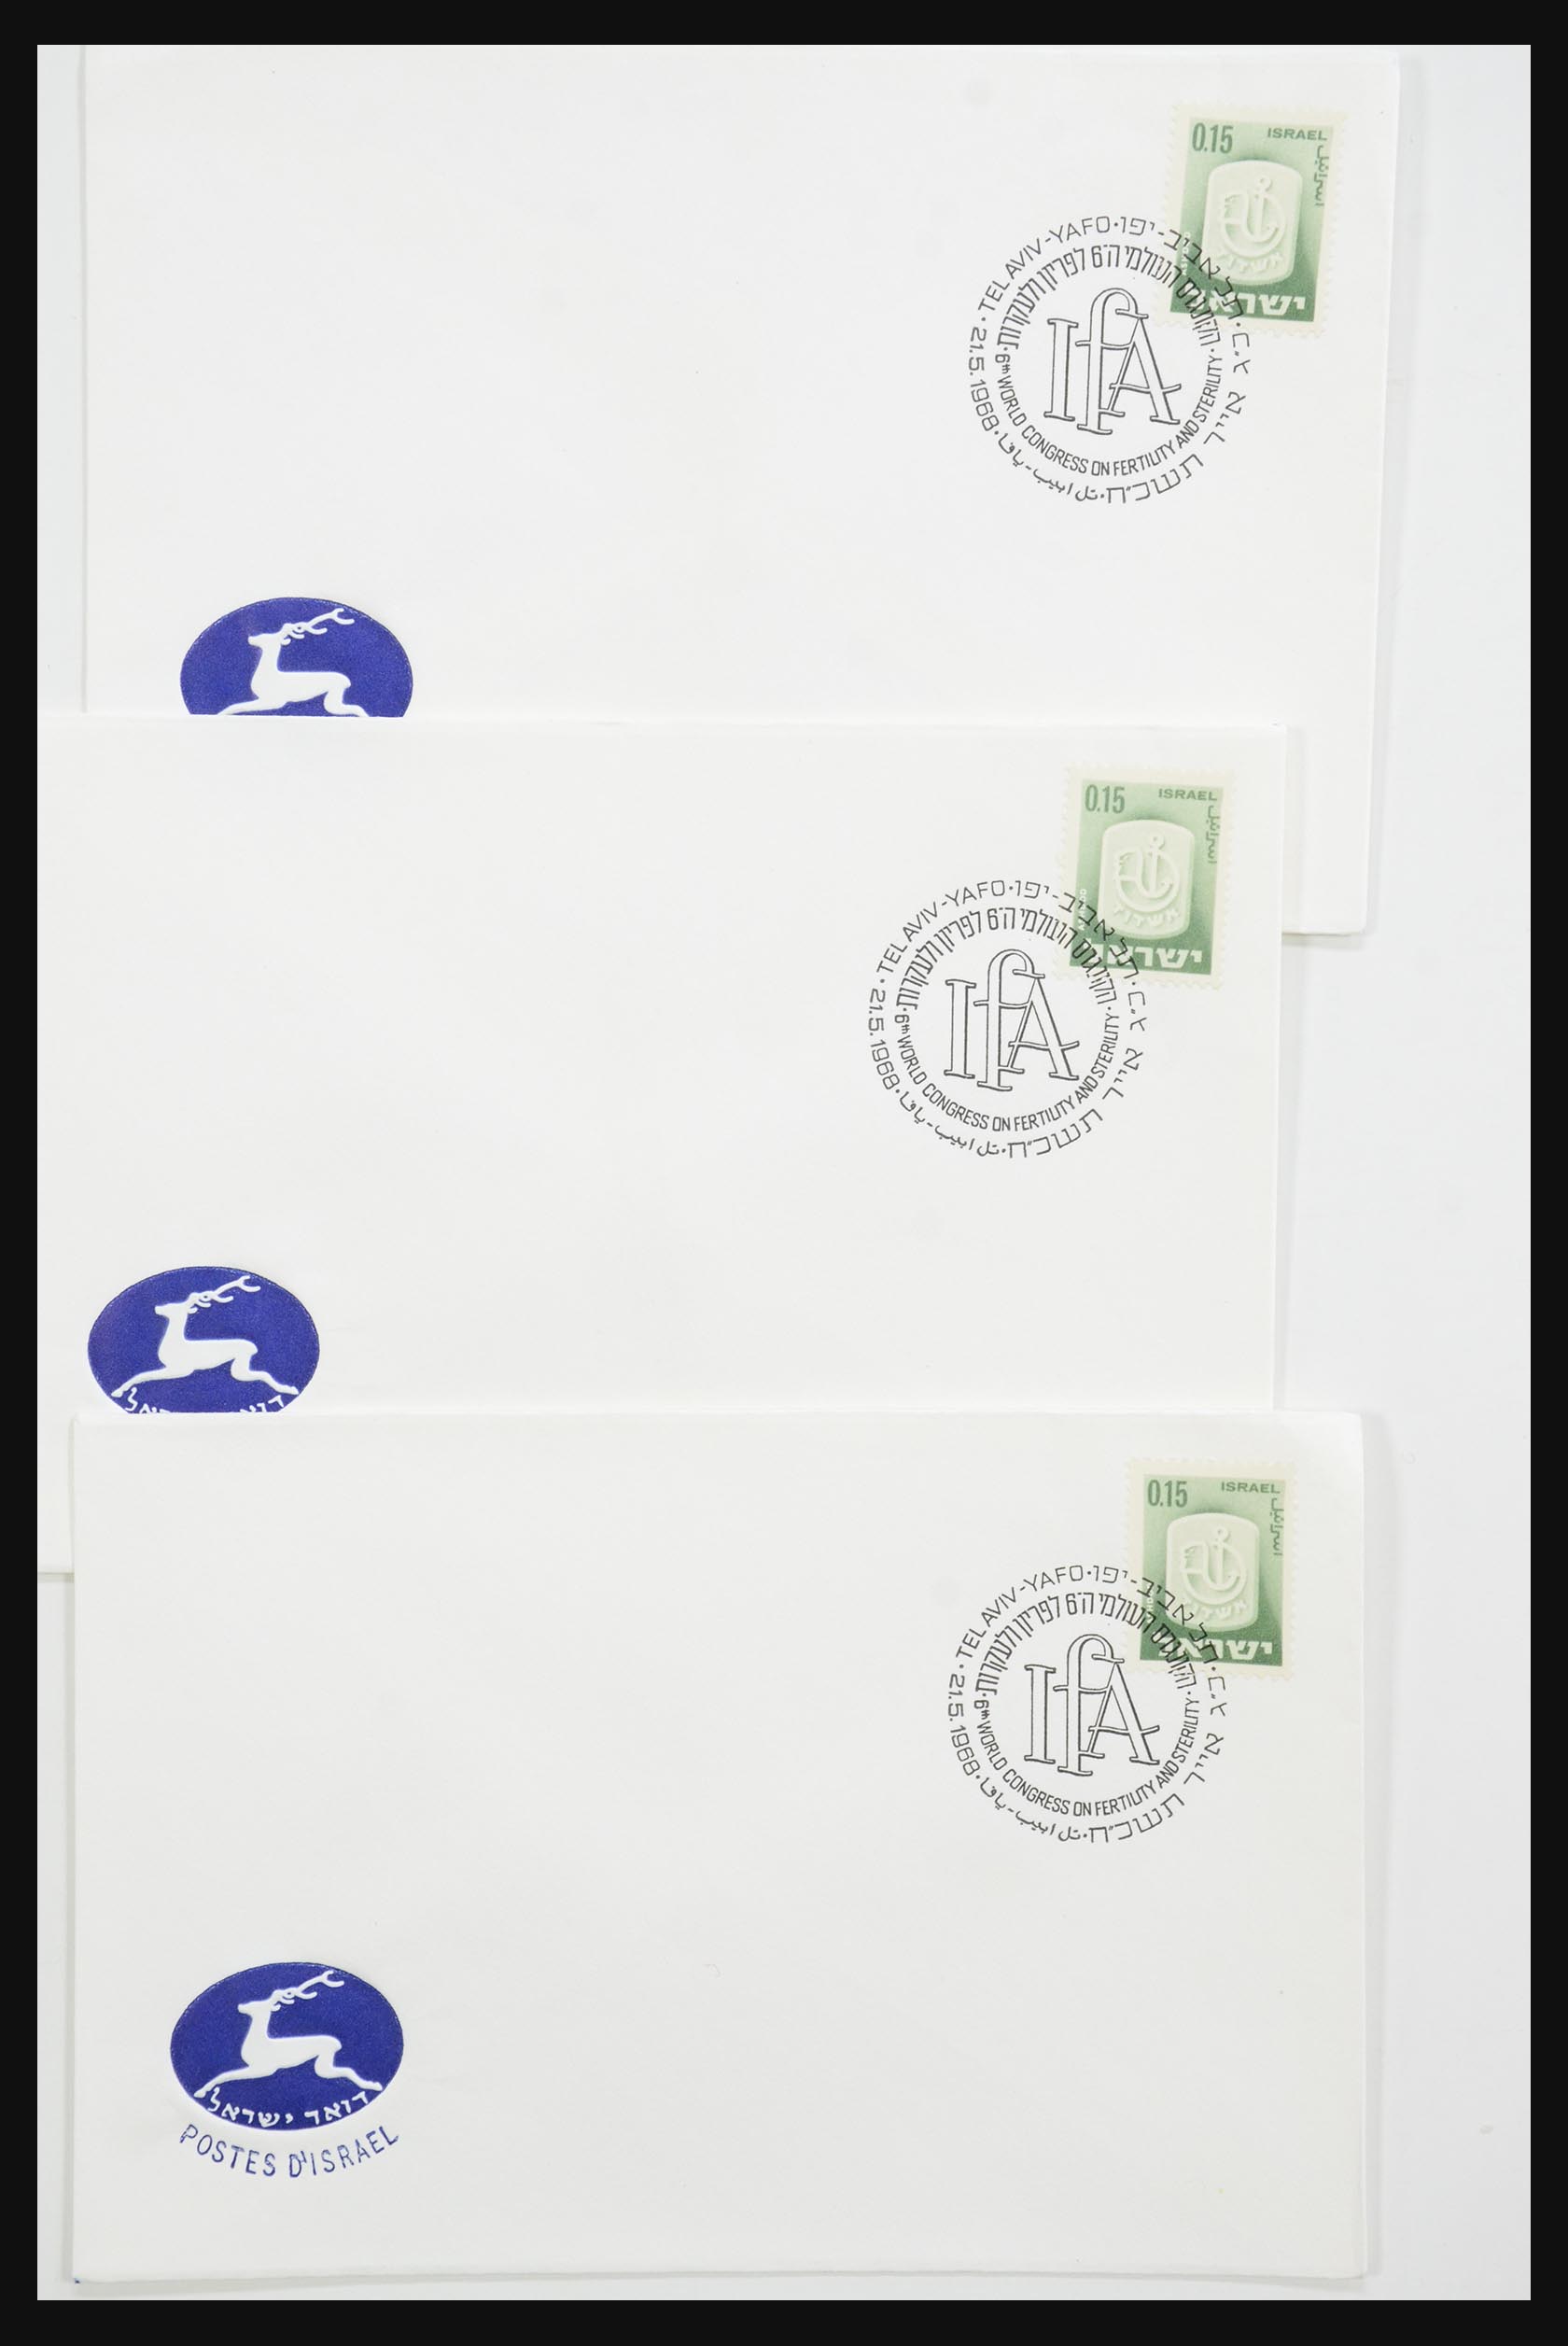 31924 088 - 31924 Israel first day cover collection 1957-2003.